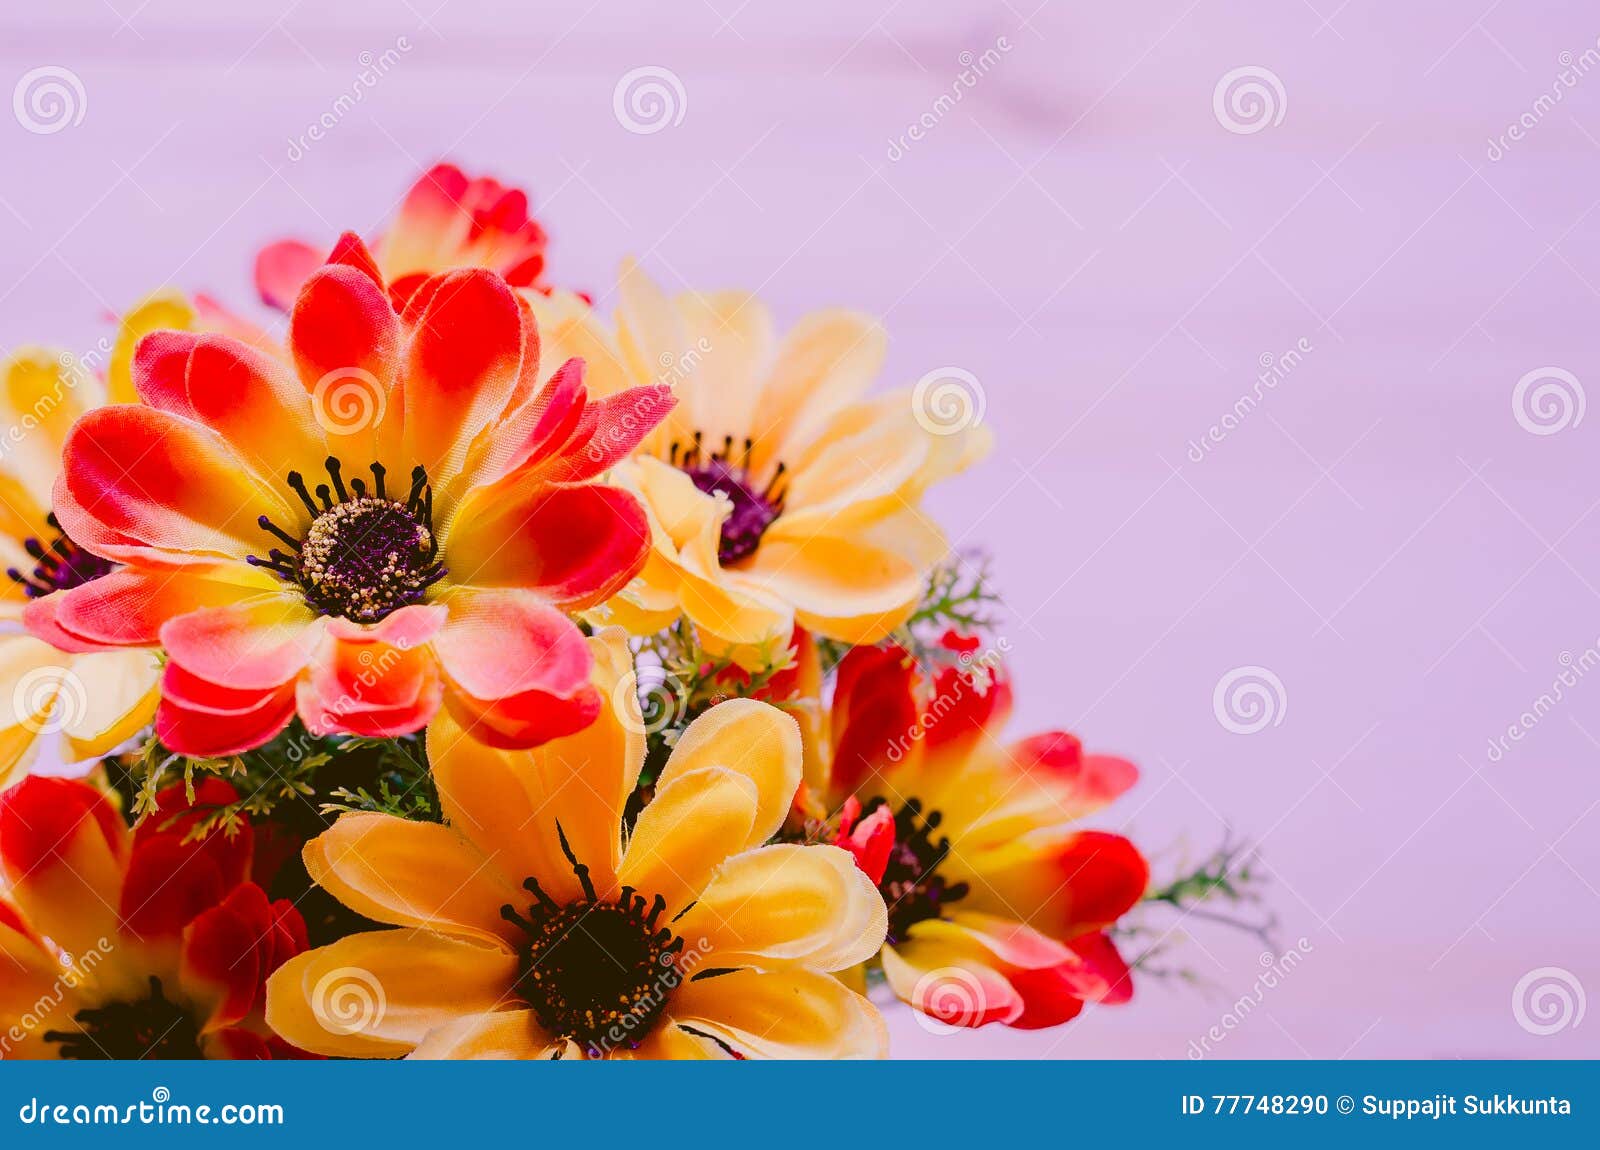 Flowers and Pot on the Office Desk. Vintage Tone Stock Photo - Image of ...